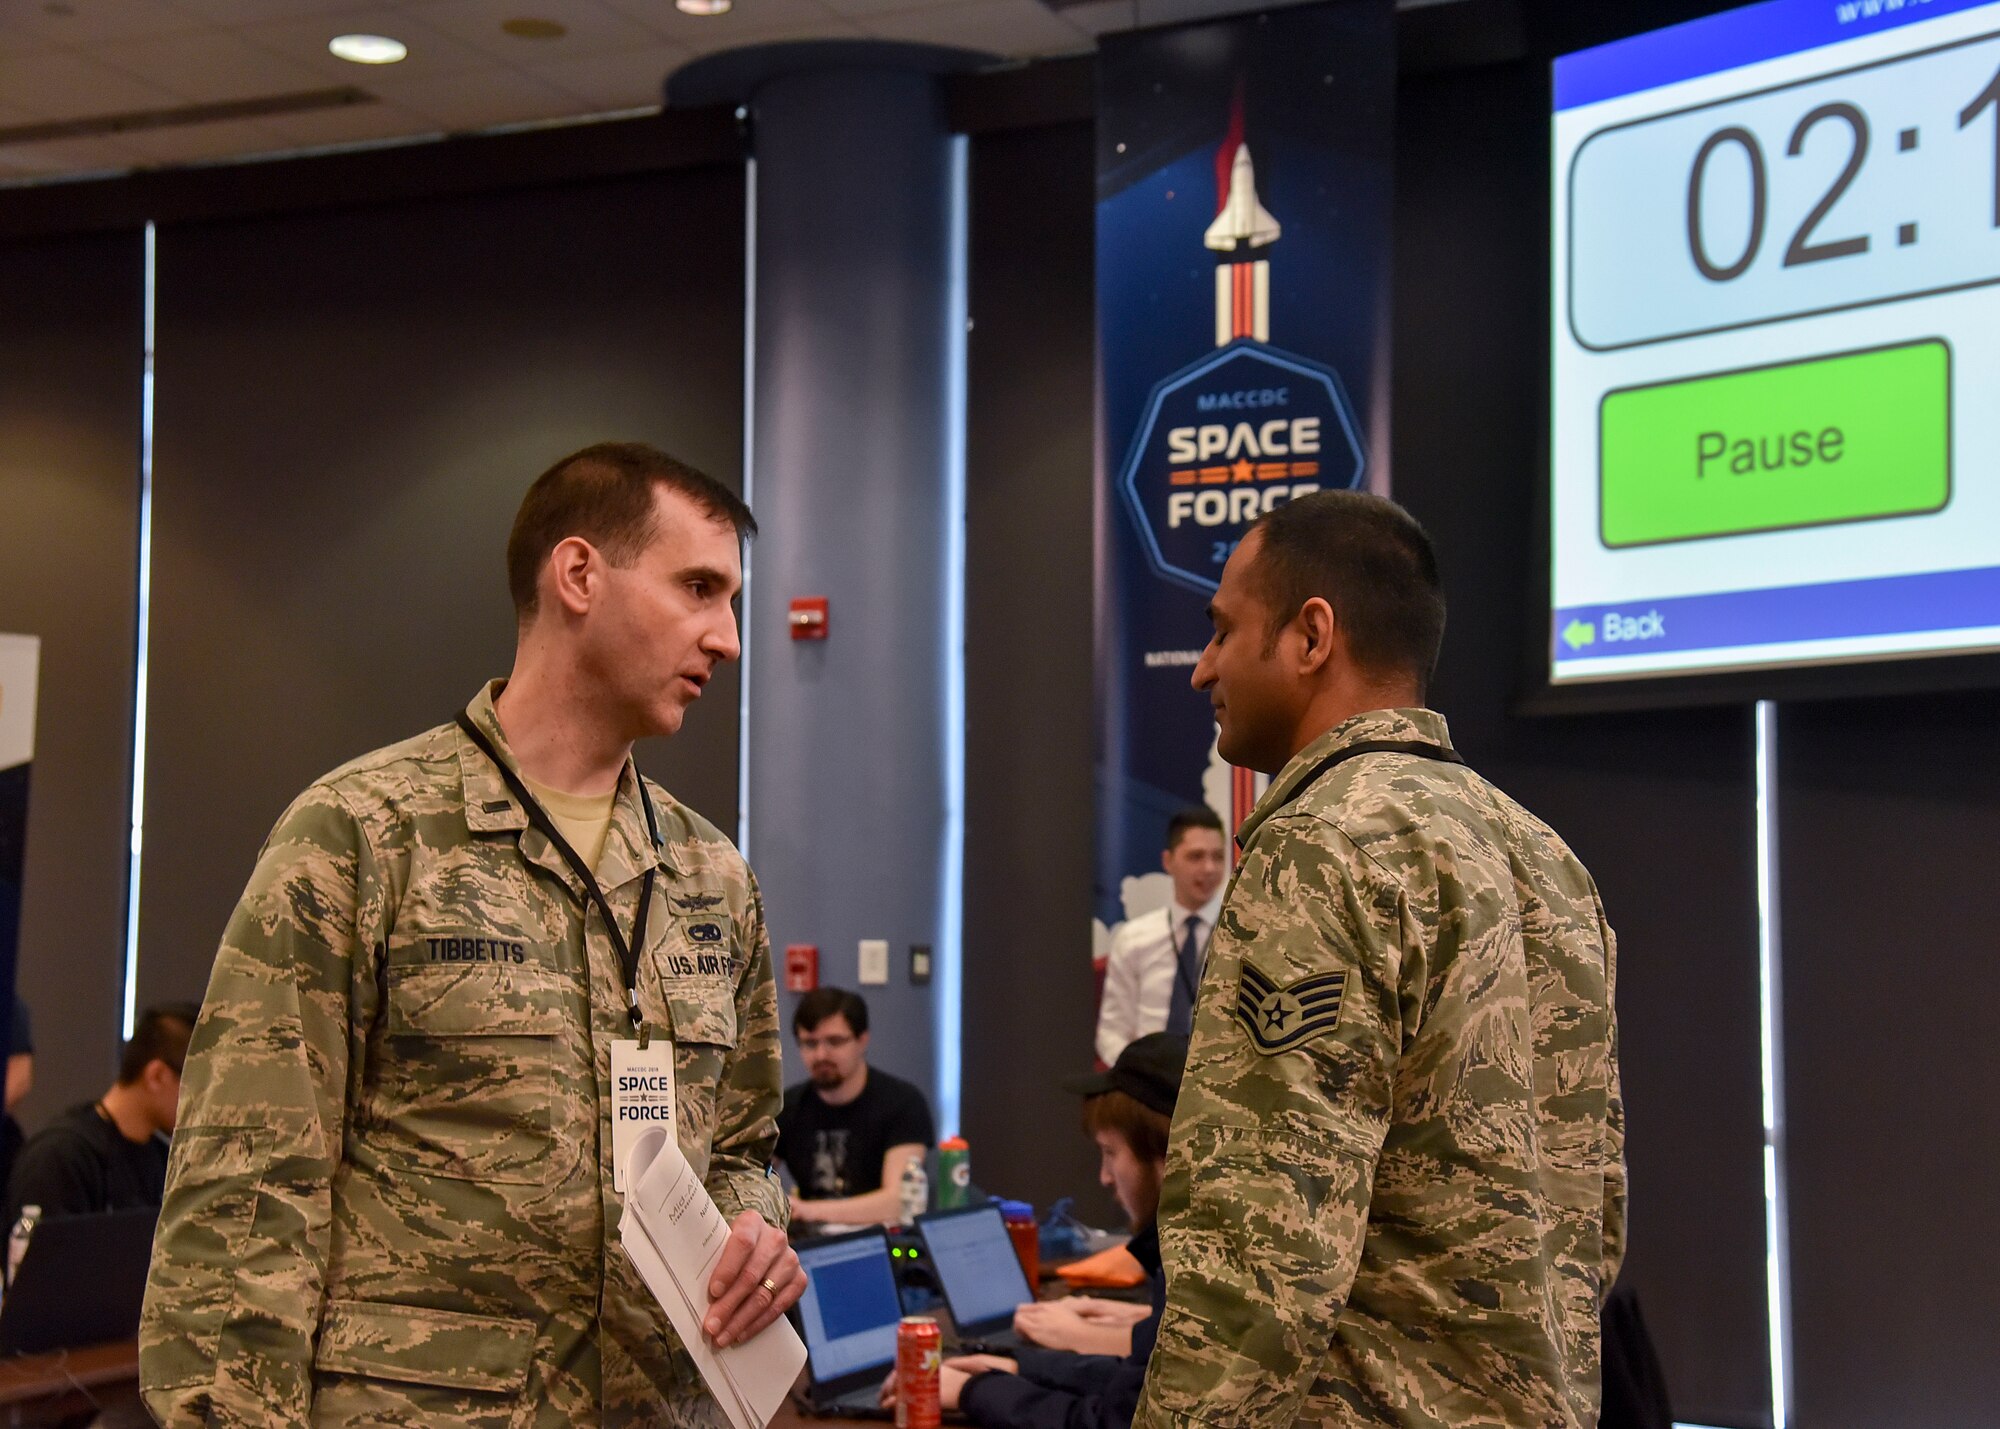 Members assigned to the 275th Cyber Operations Group, Maryland Air National Guard, participated in the 14th Annual Mid-Atlantic Collegiate Cyber Defense Competition Regional Finals, March 29, 2019 at Johns Hopkins Applied Physics Laboratory, Laurel, Md. The 275th COG has participated in the competition for over four years in different capacities.